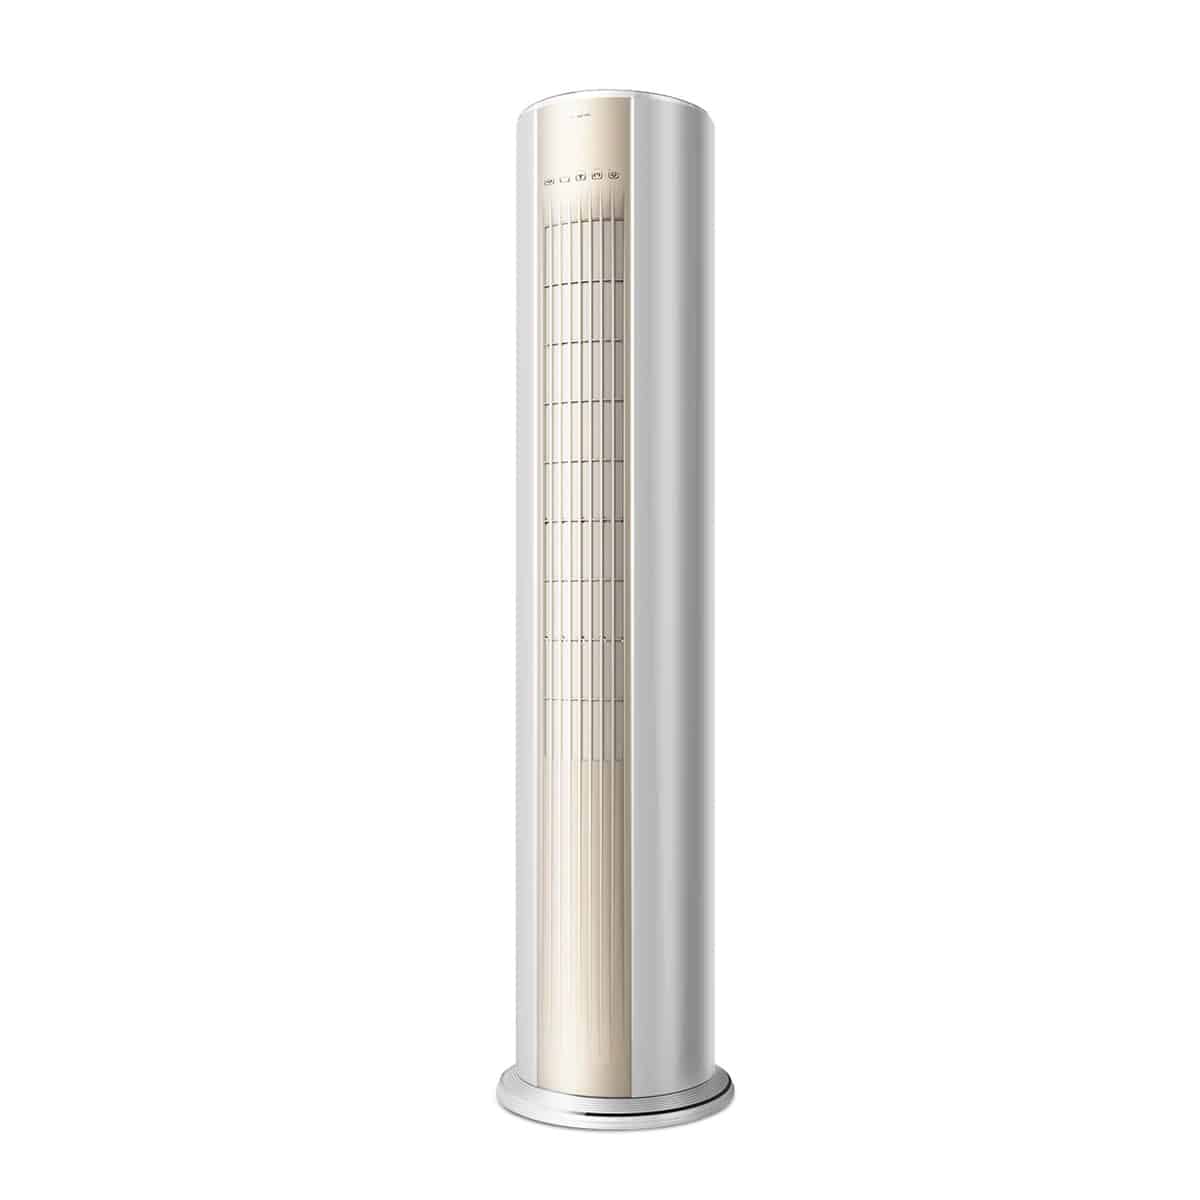 TCL 2.0hp R32 Round Floor Standing Tower Air Conditioner TAC-18CFD/MCI